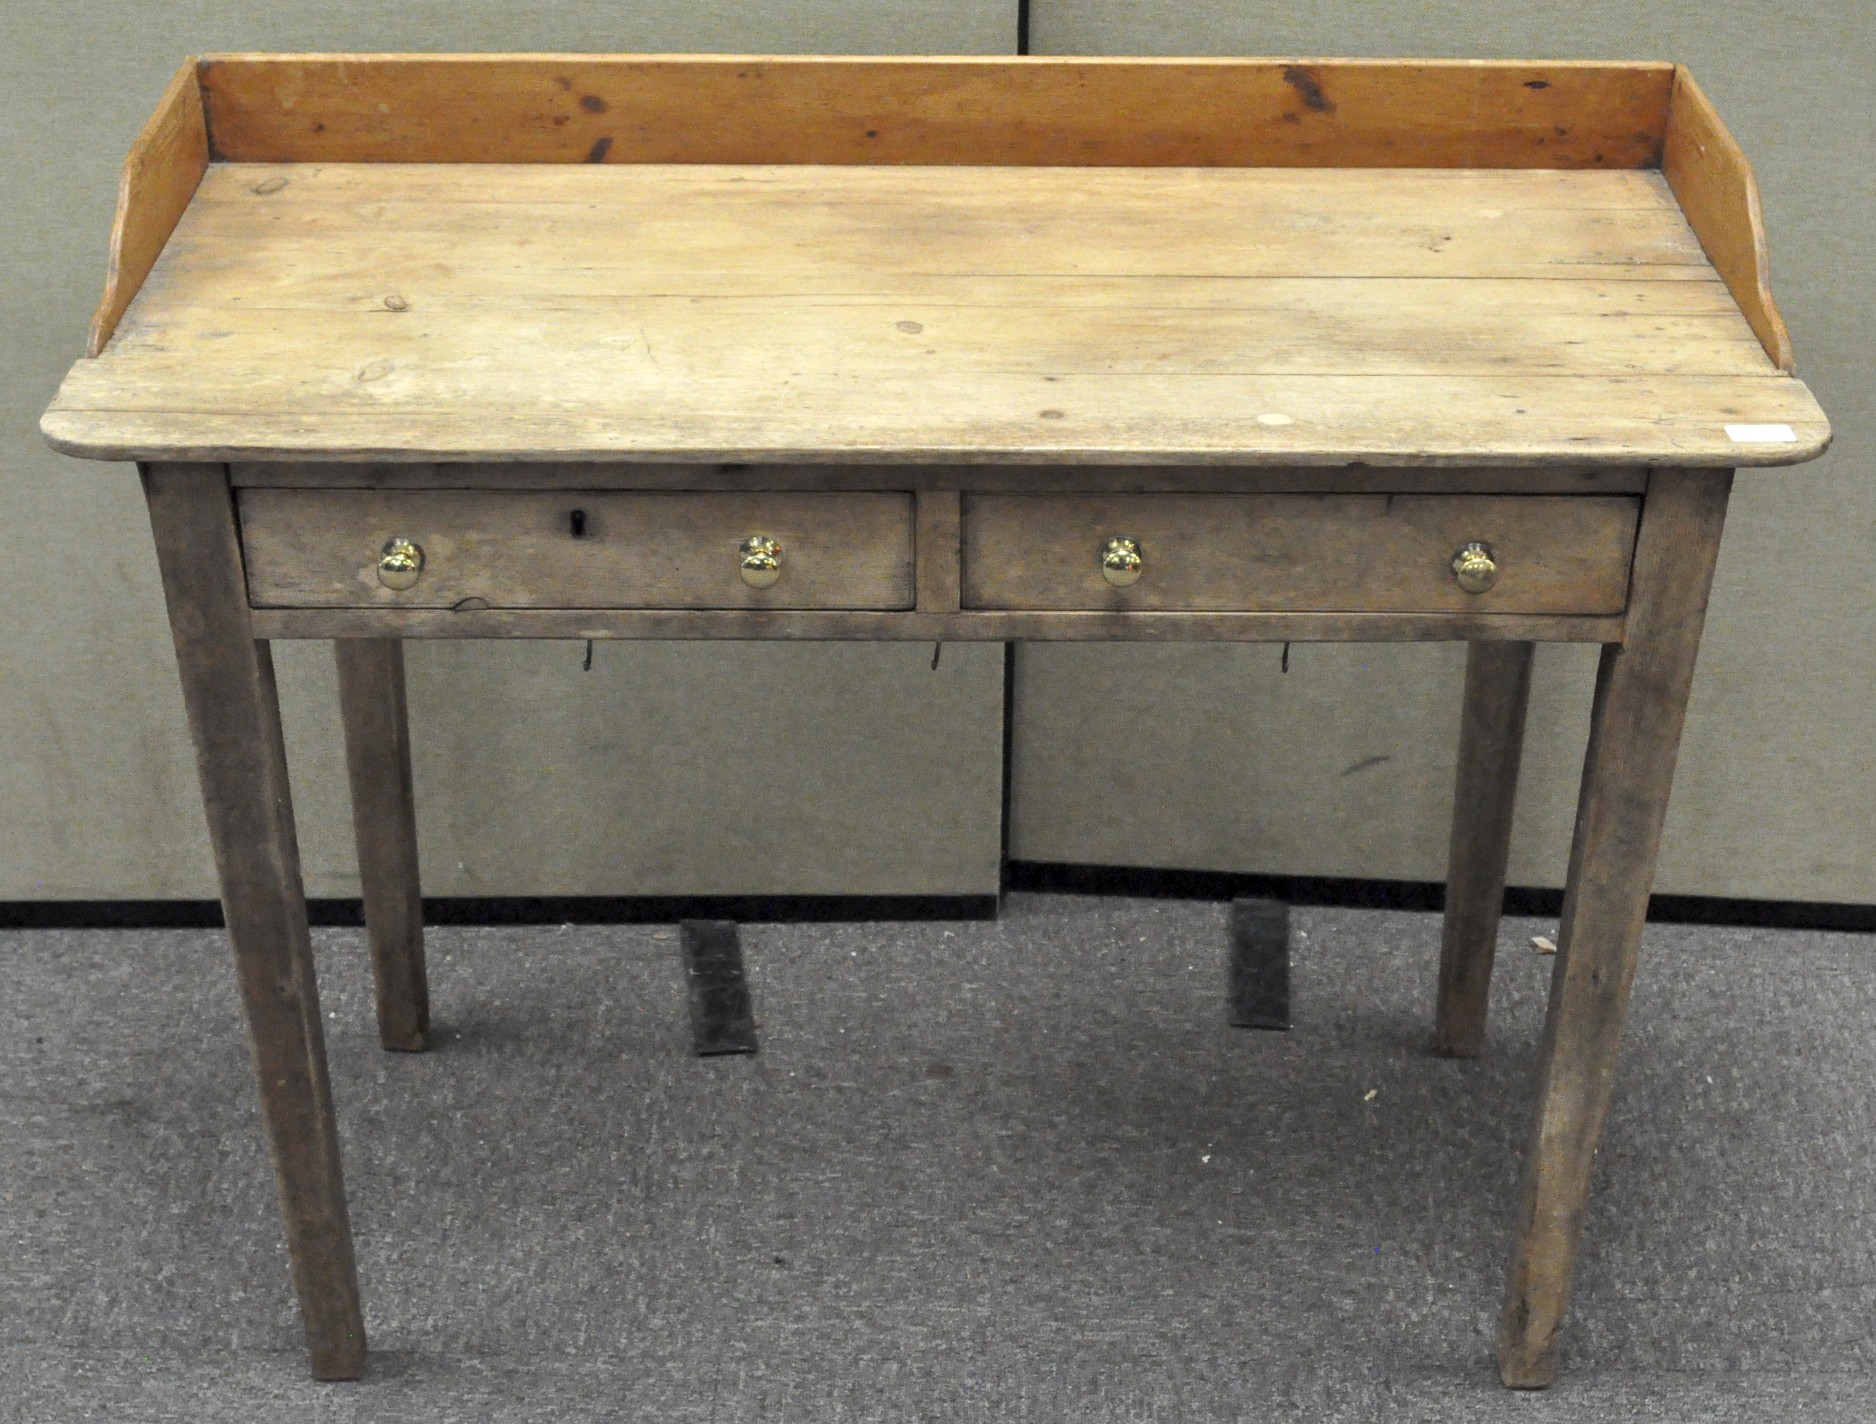 An early 20th century pine desk with two drawers to the front,